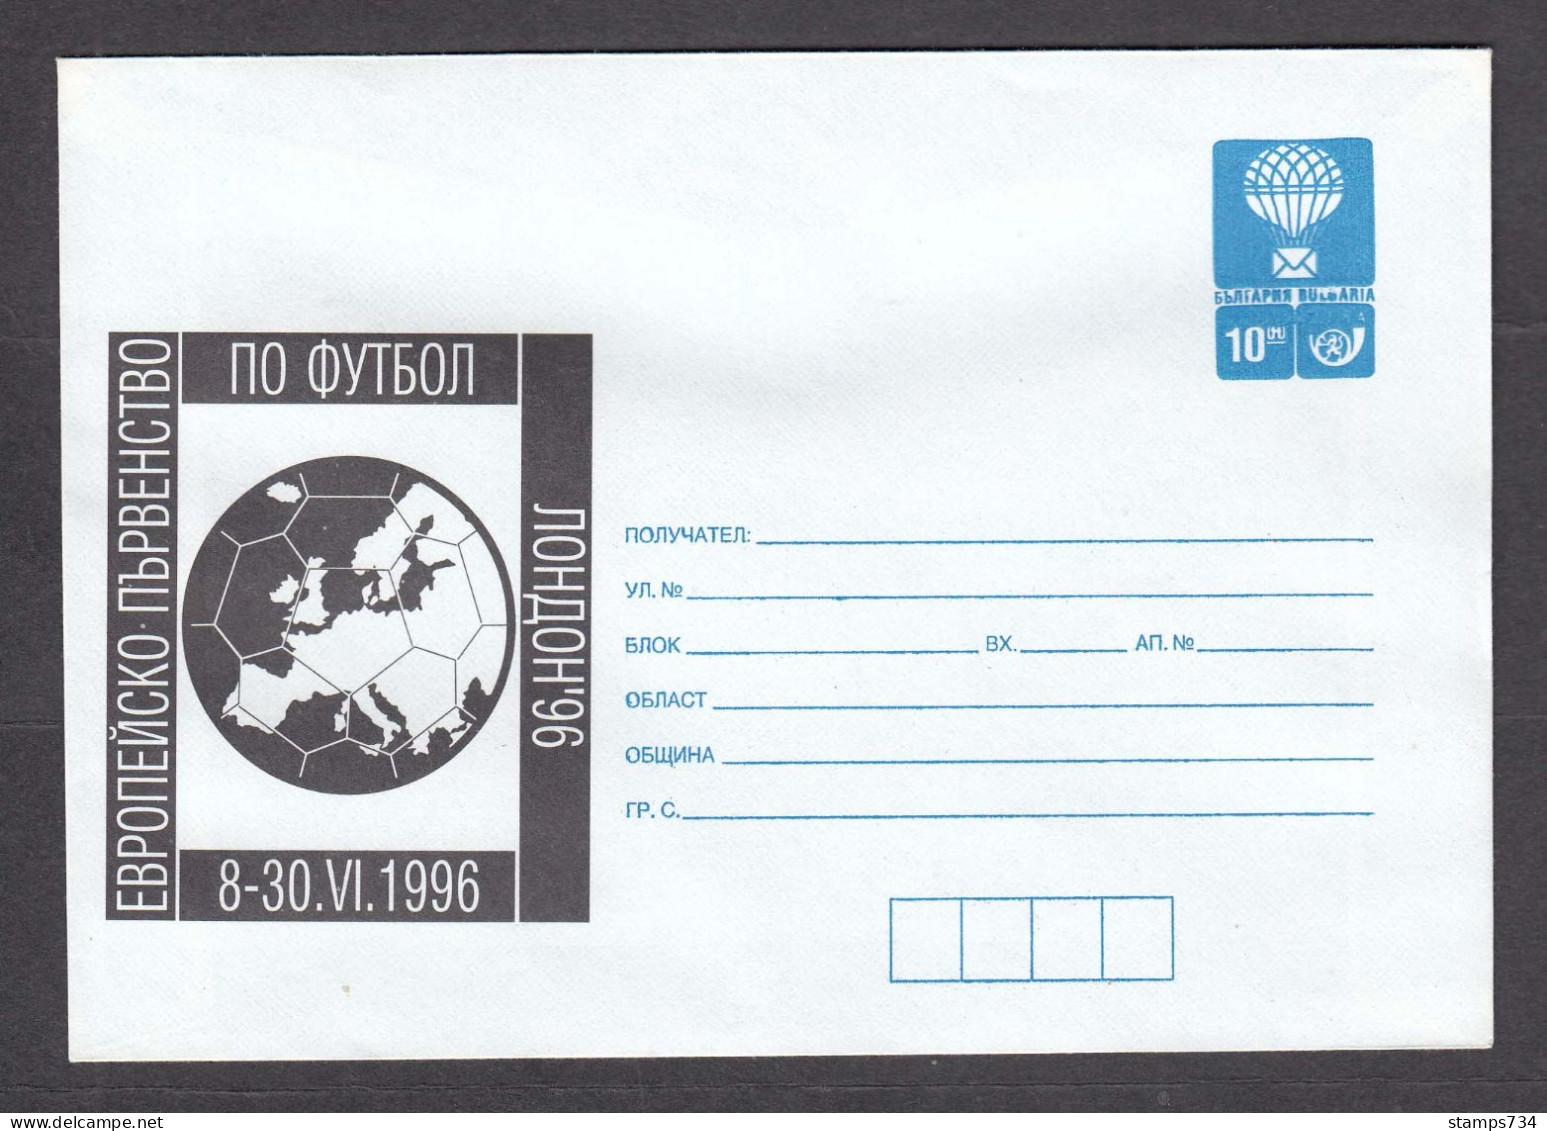 PS 1260/1996 - Mint, Football European Cup, Post. Stationery - Bulgaria - Covers